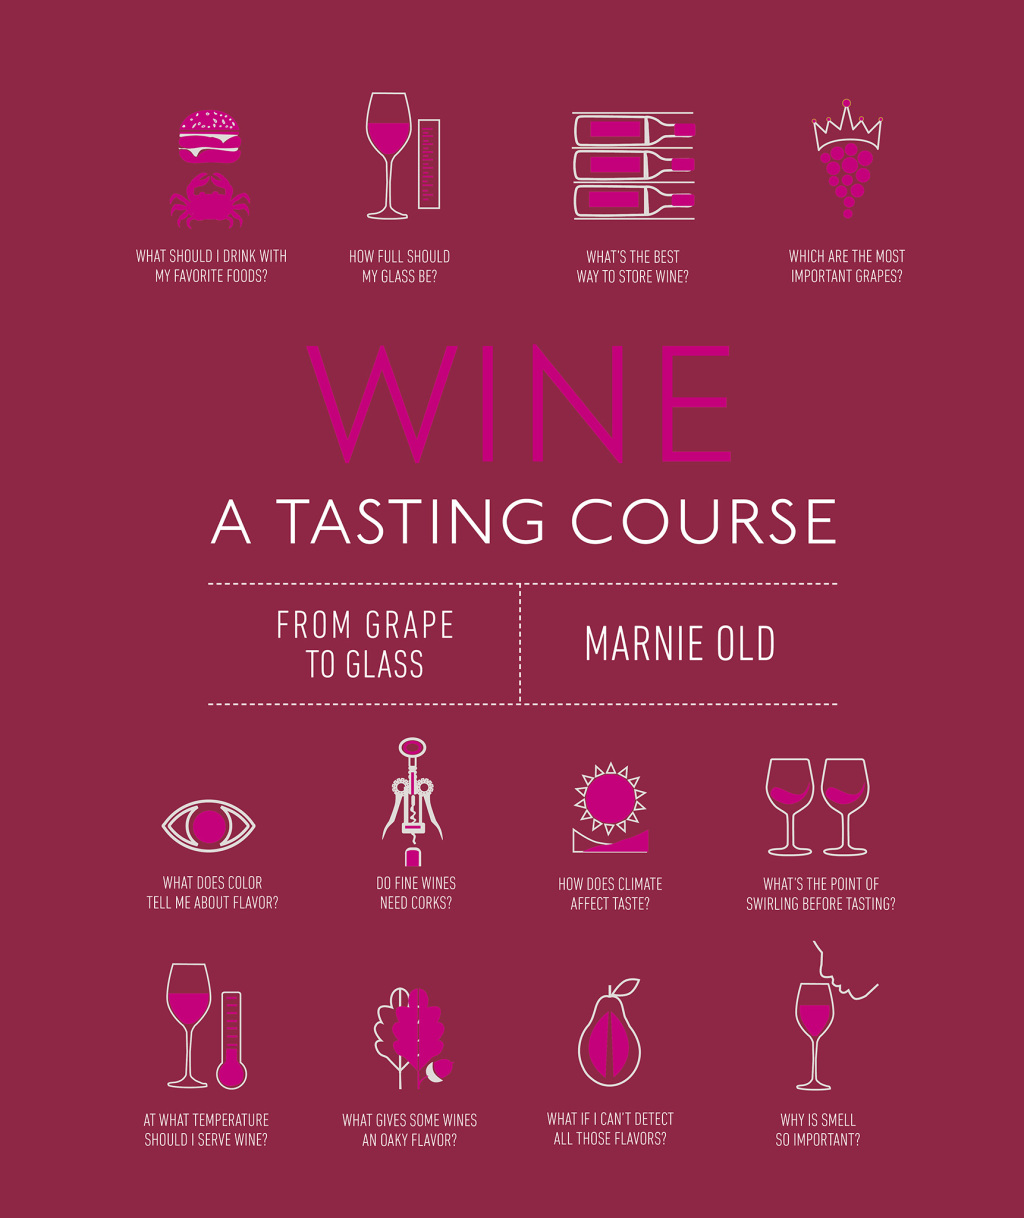 ISBN 9780744057072 product image for Wine A Tasting Course (eBook) | upcitemdb.com